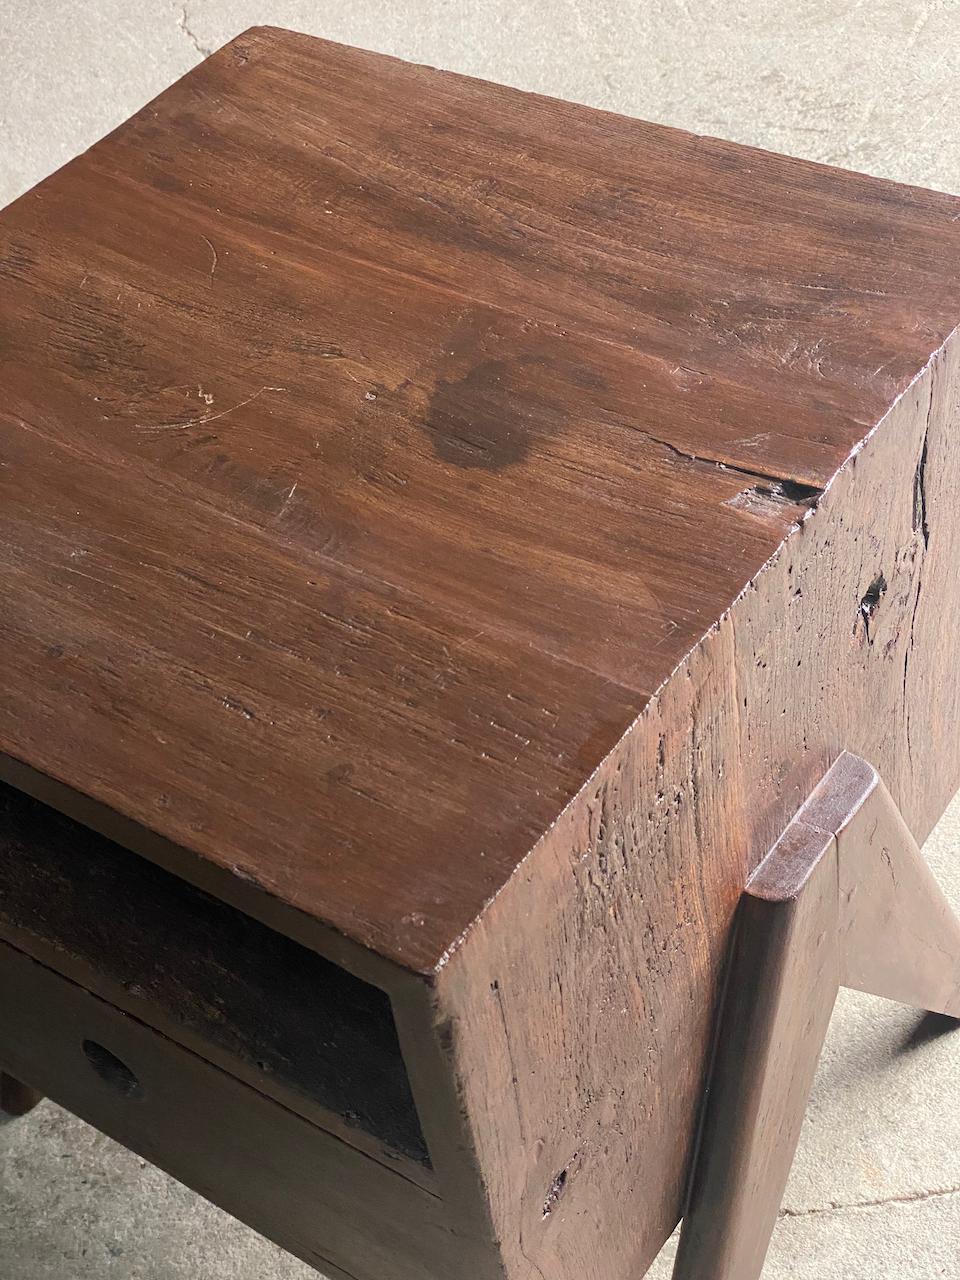 Pierre Jeanneret Bedside Tables PJ-050501 Chandigarh India, Circa 1955 For Sale 1